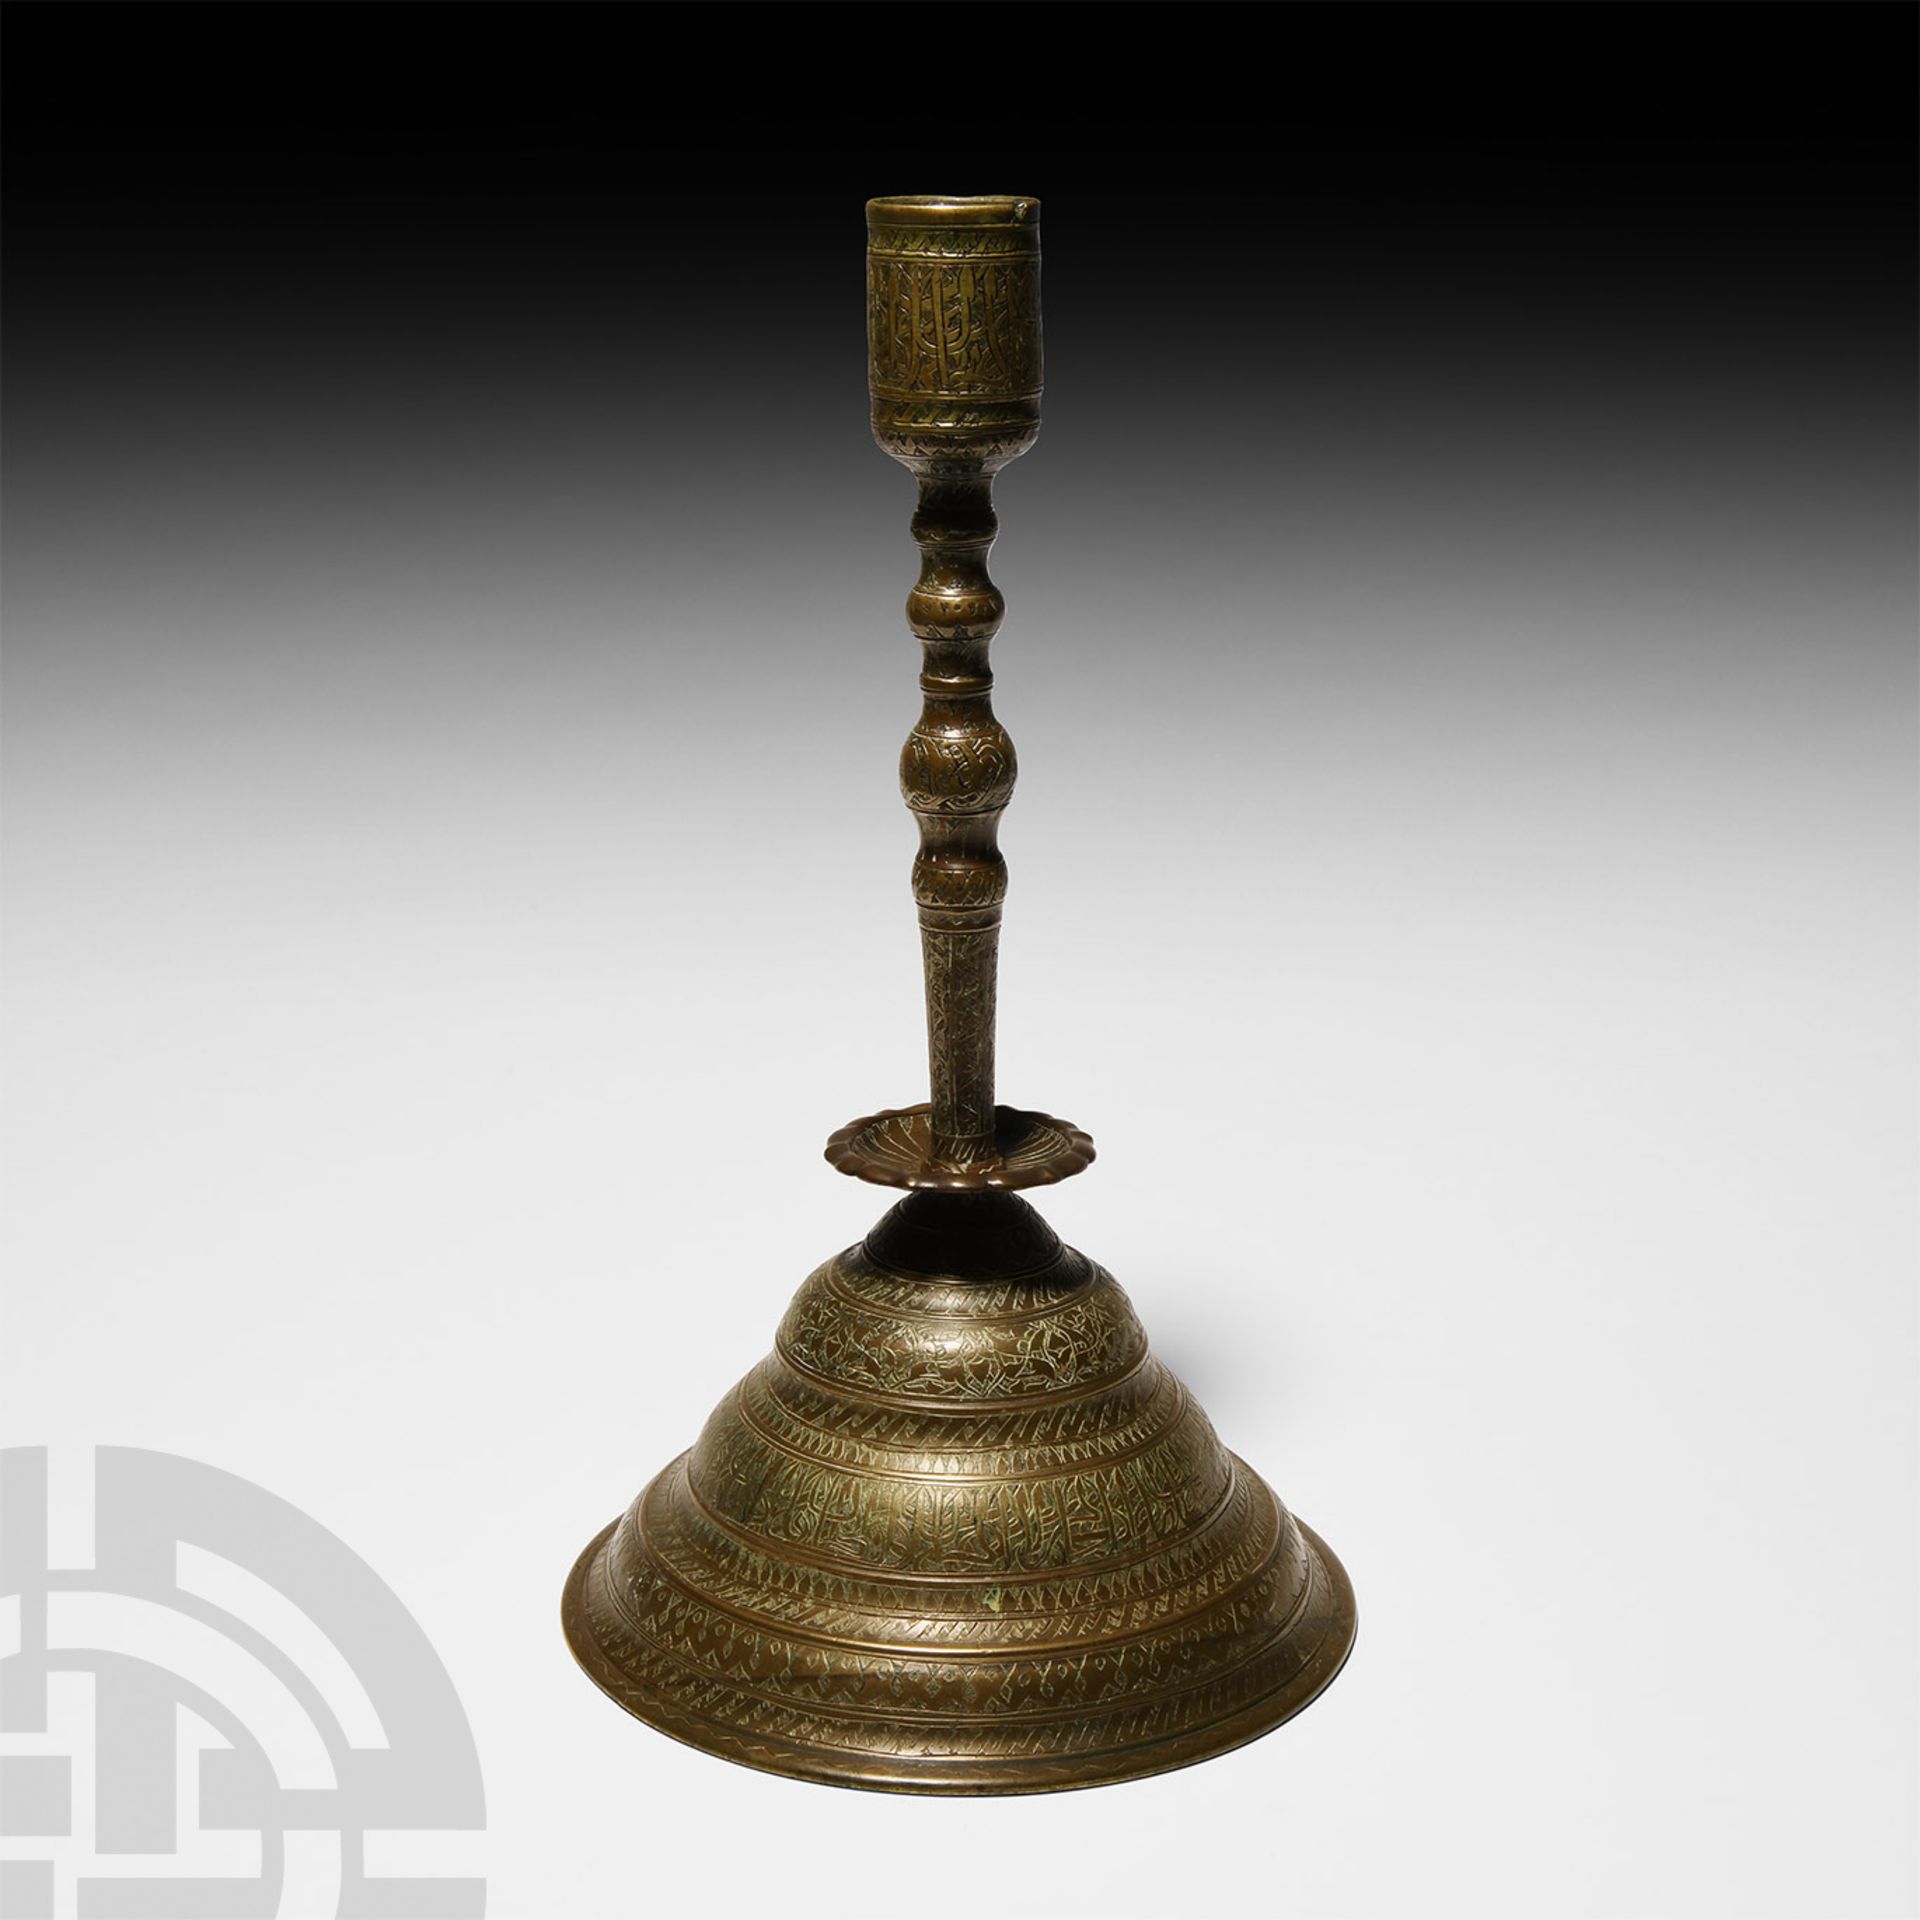 Brass Candlestick with Calligraphy